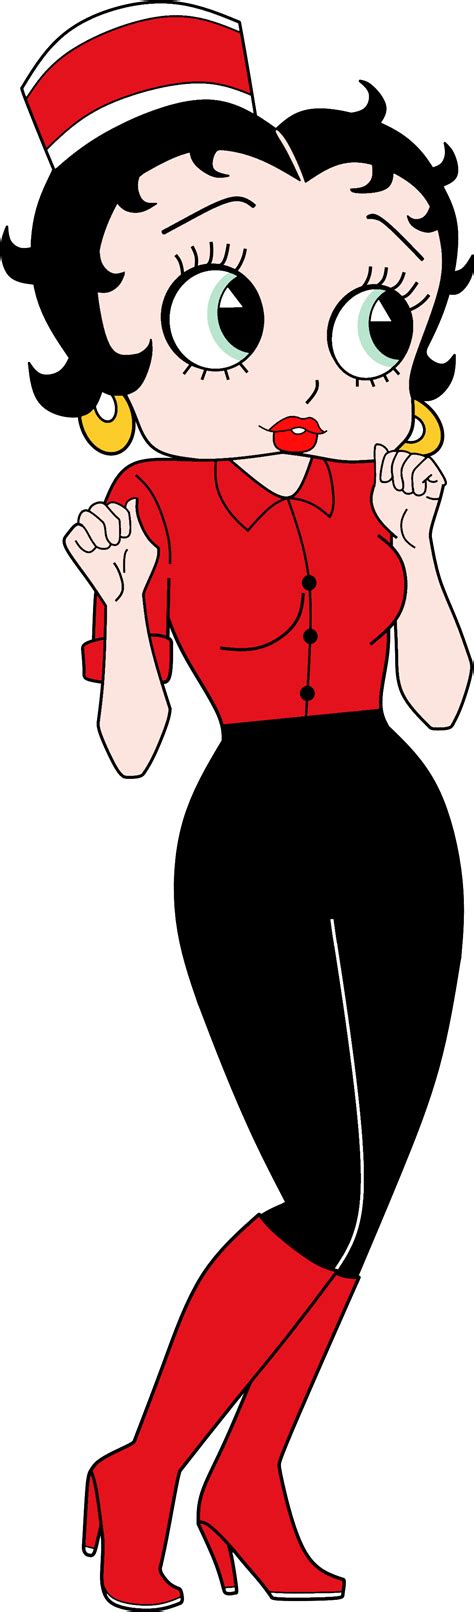 Download Betty Boop Anime Waitress Render - Betty Boop Clipart Png png image